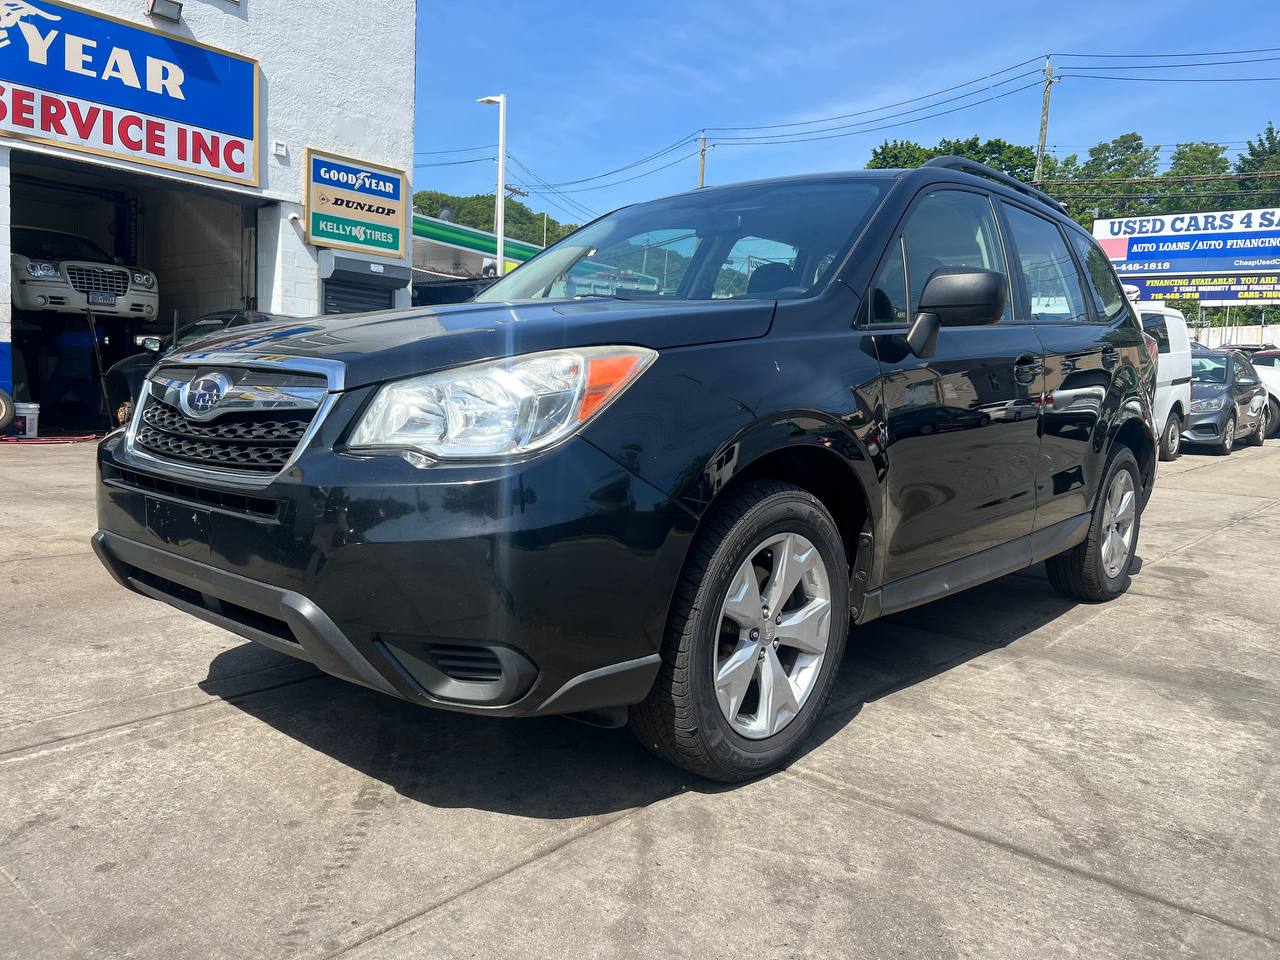 Used Car - 2015 Subaru Forester 2.5i AWD for Sale in Staten Island, NY